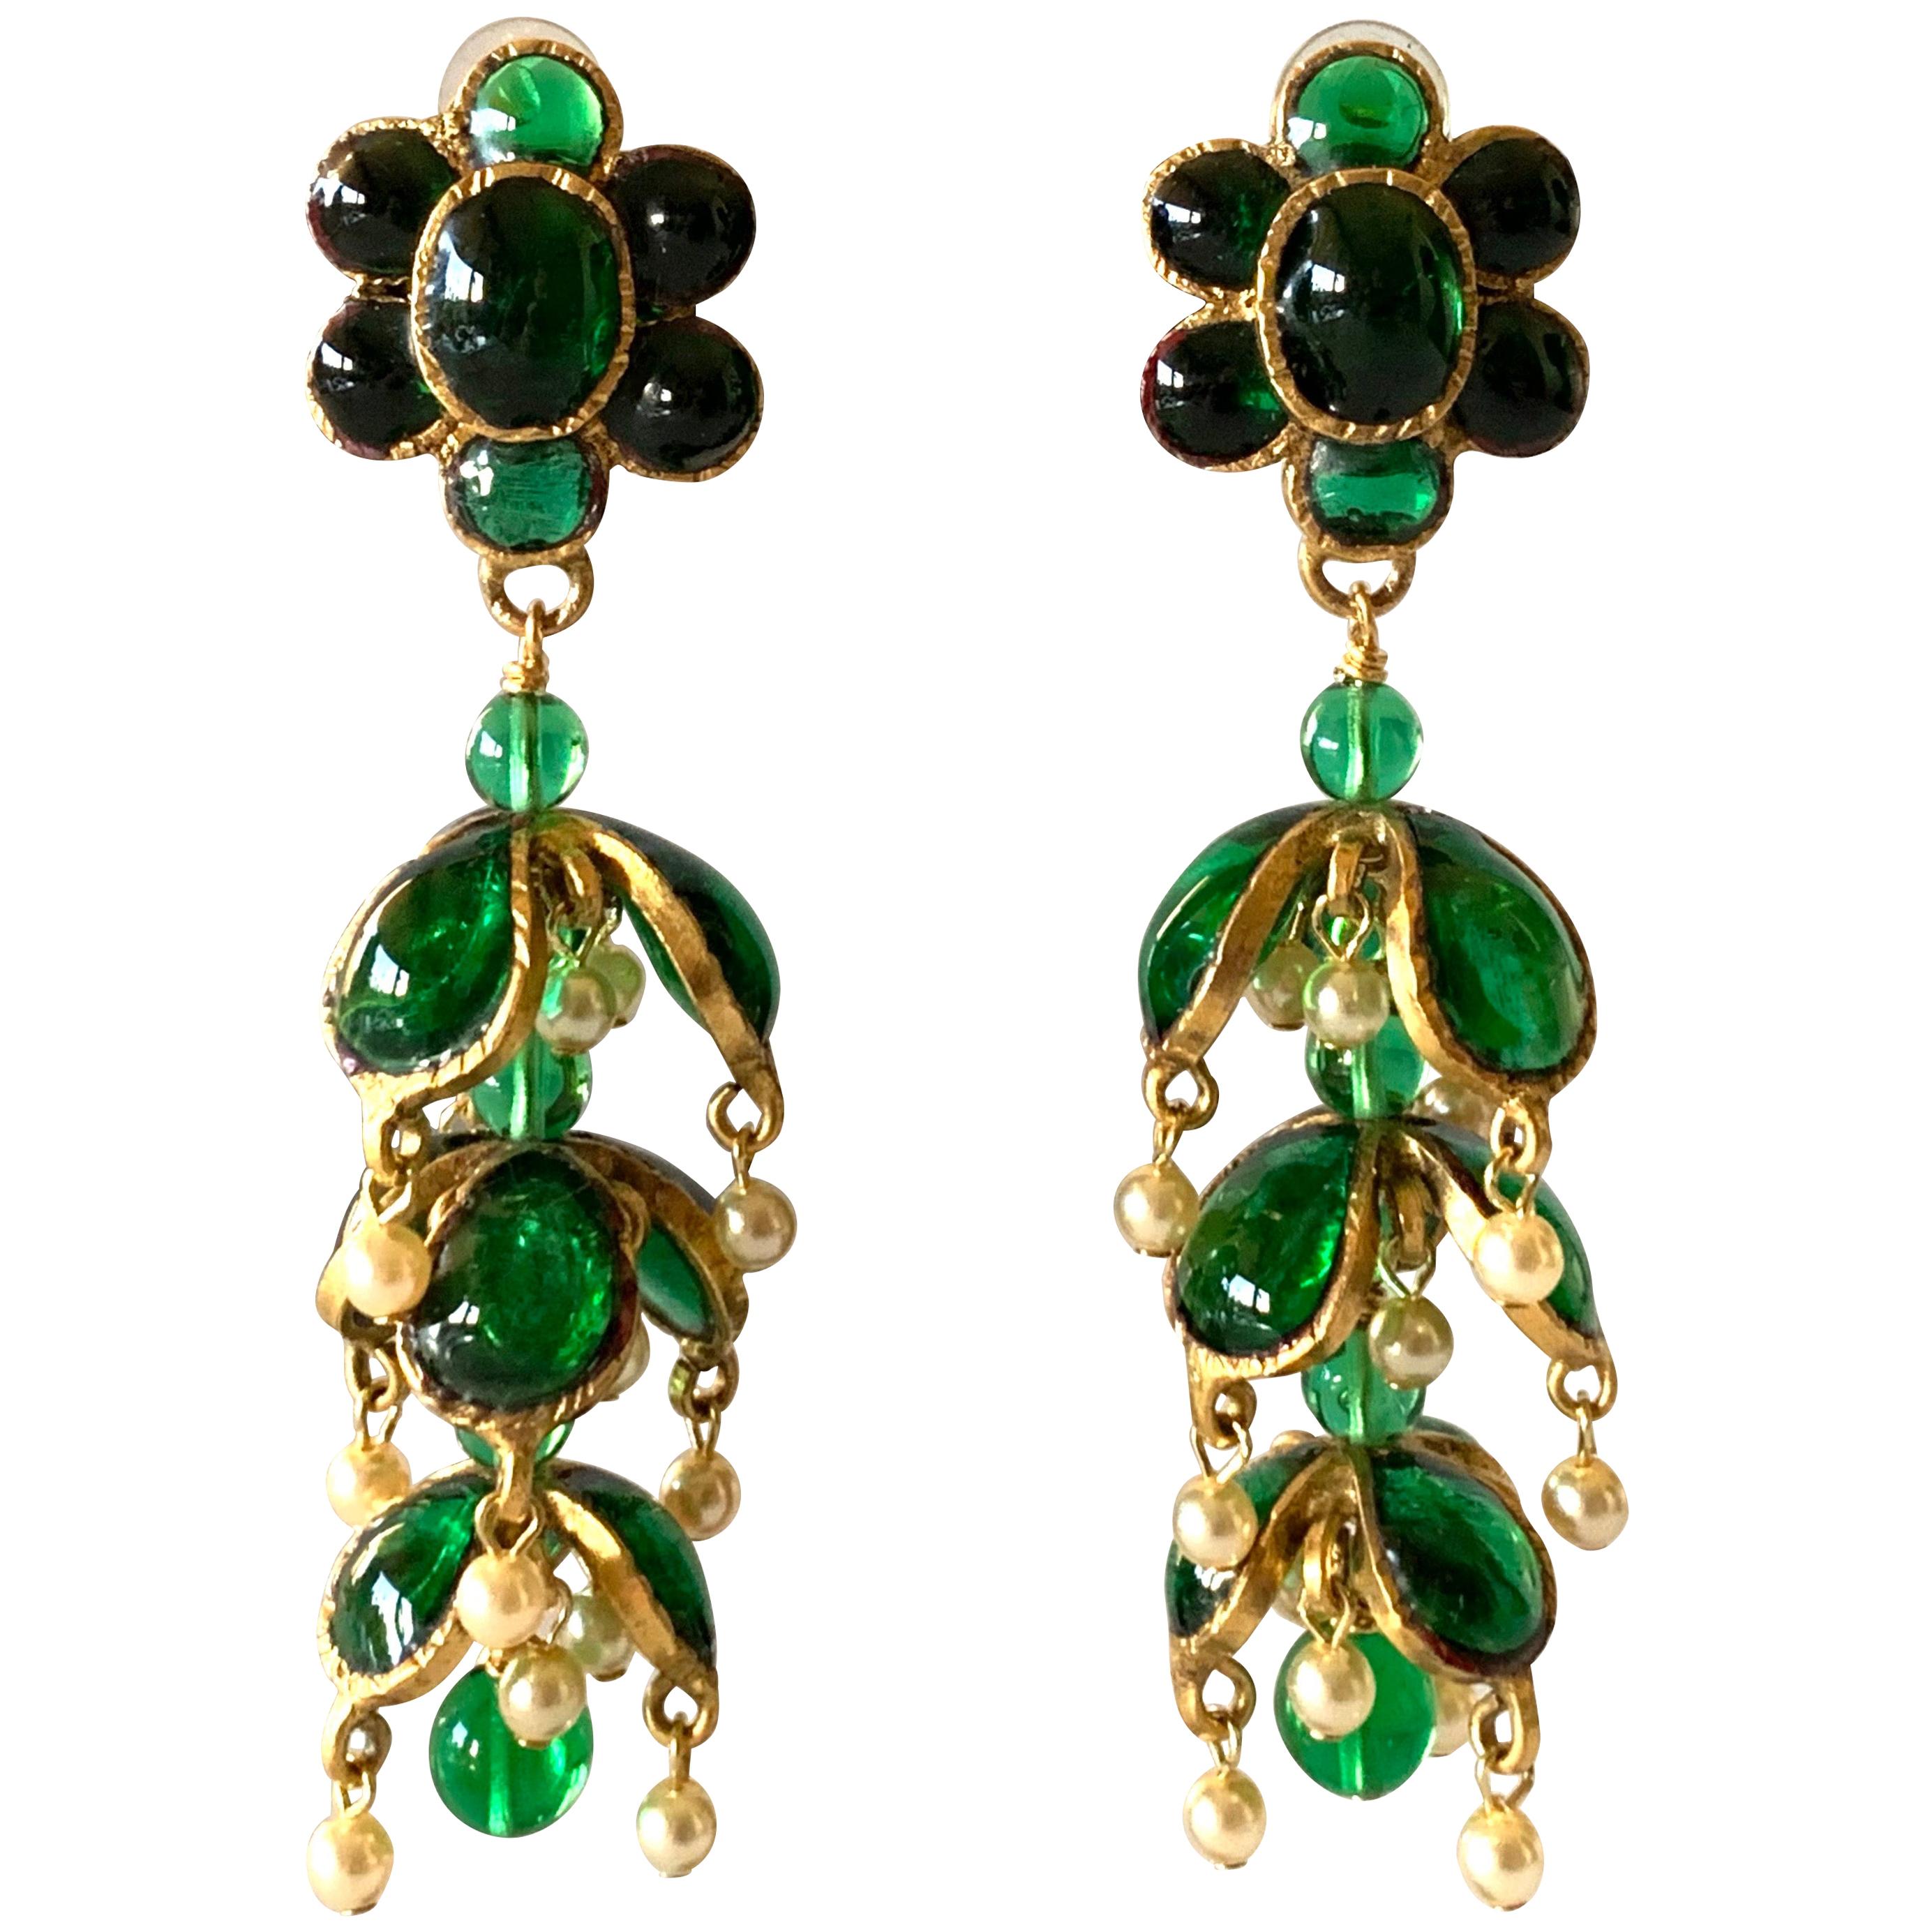 Vintage Chanel Emerald and Pearl Mughal Statement Earrings 